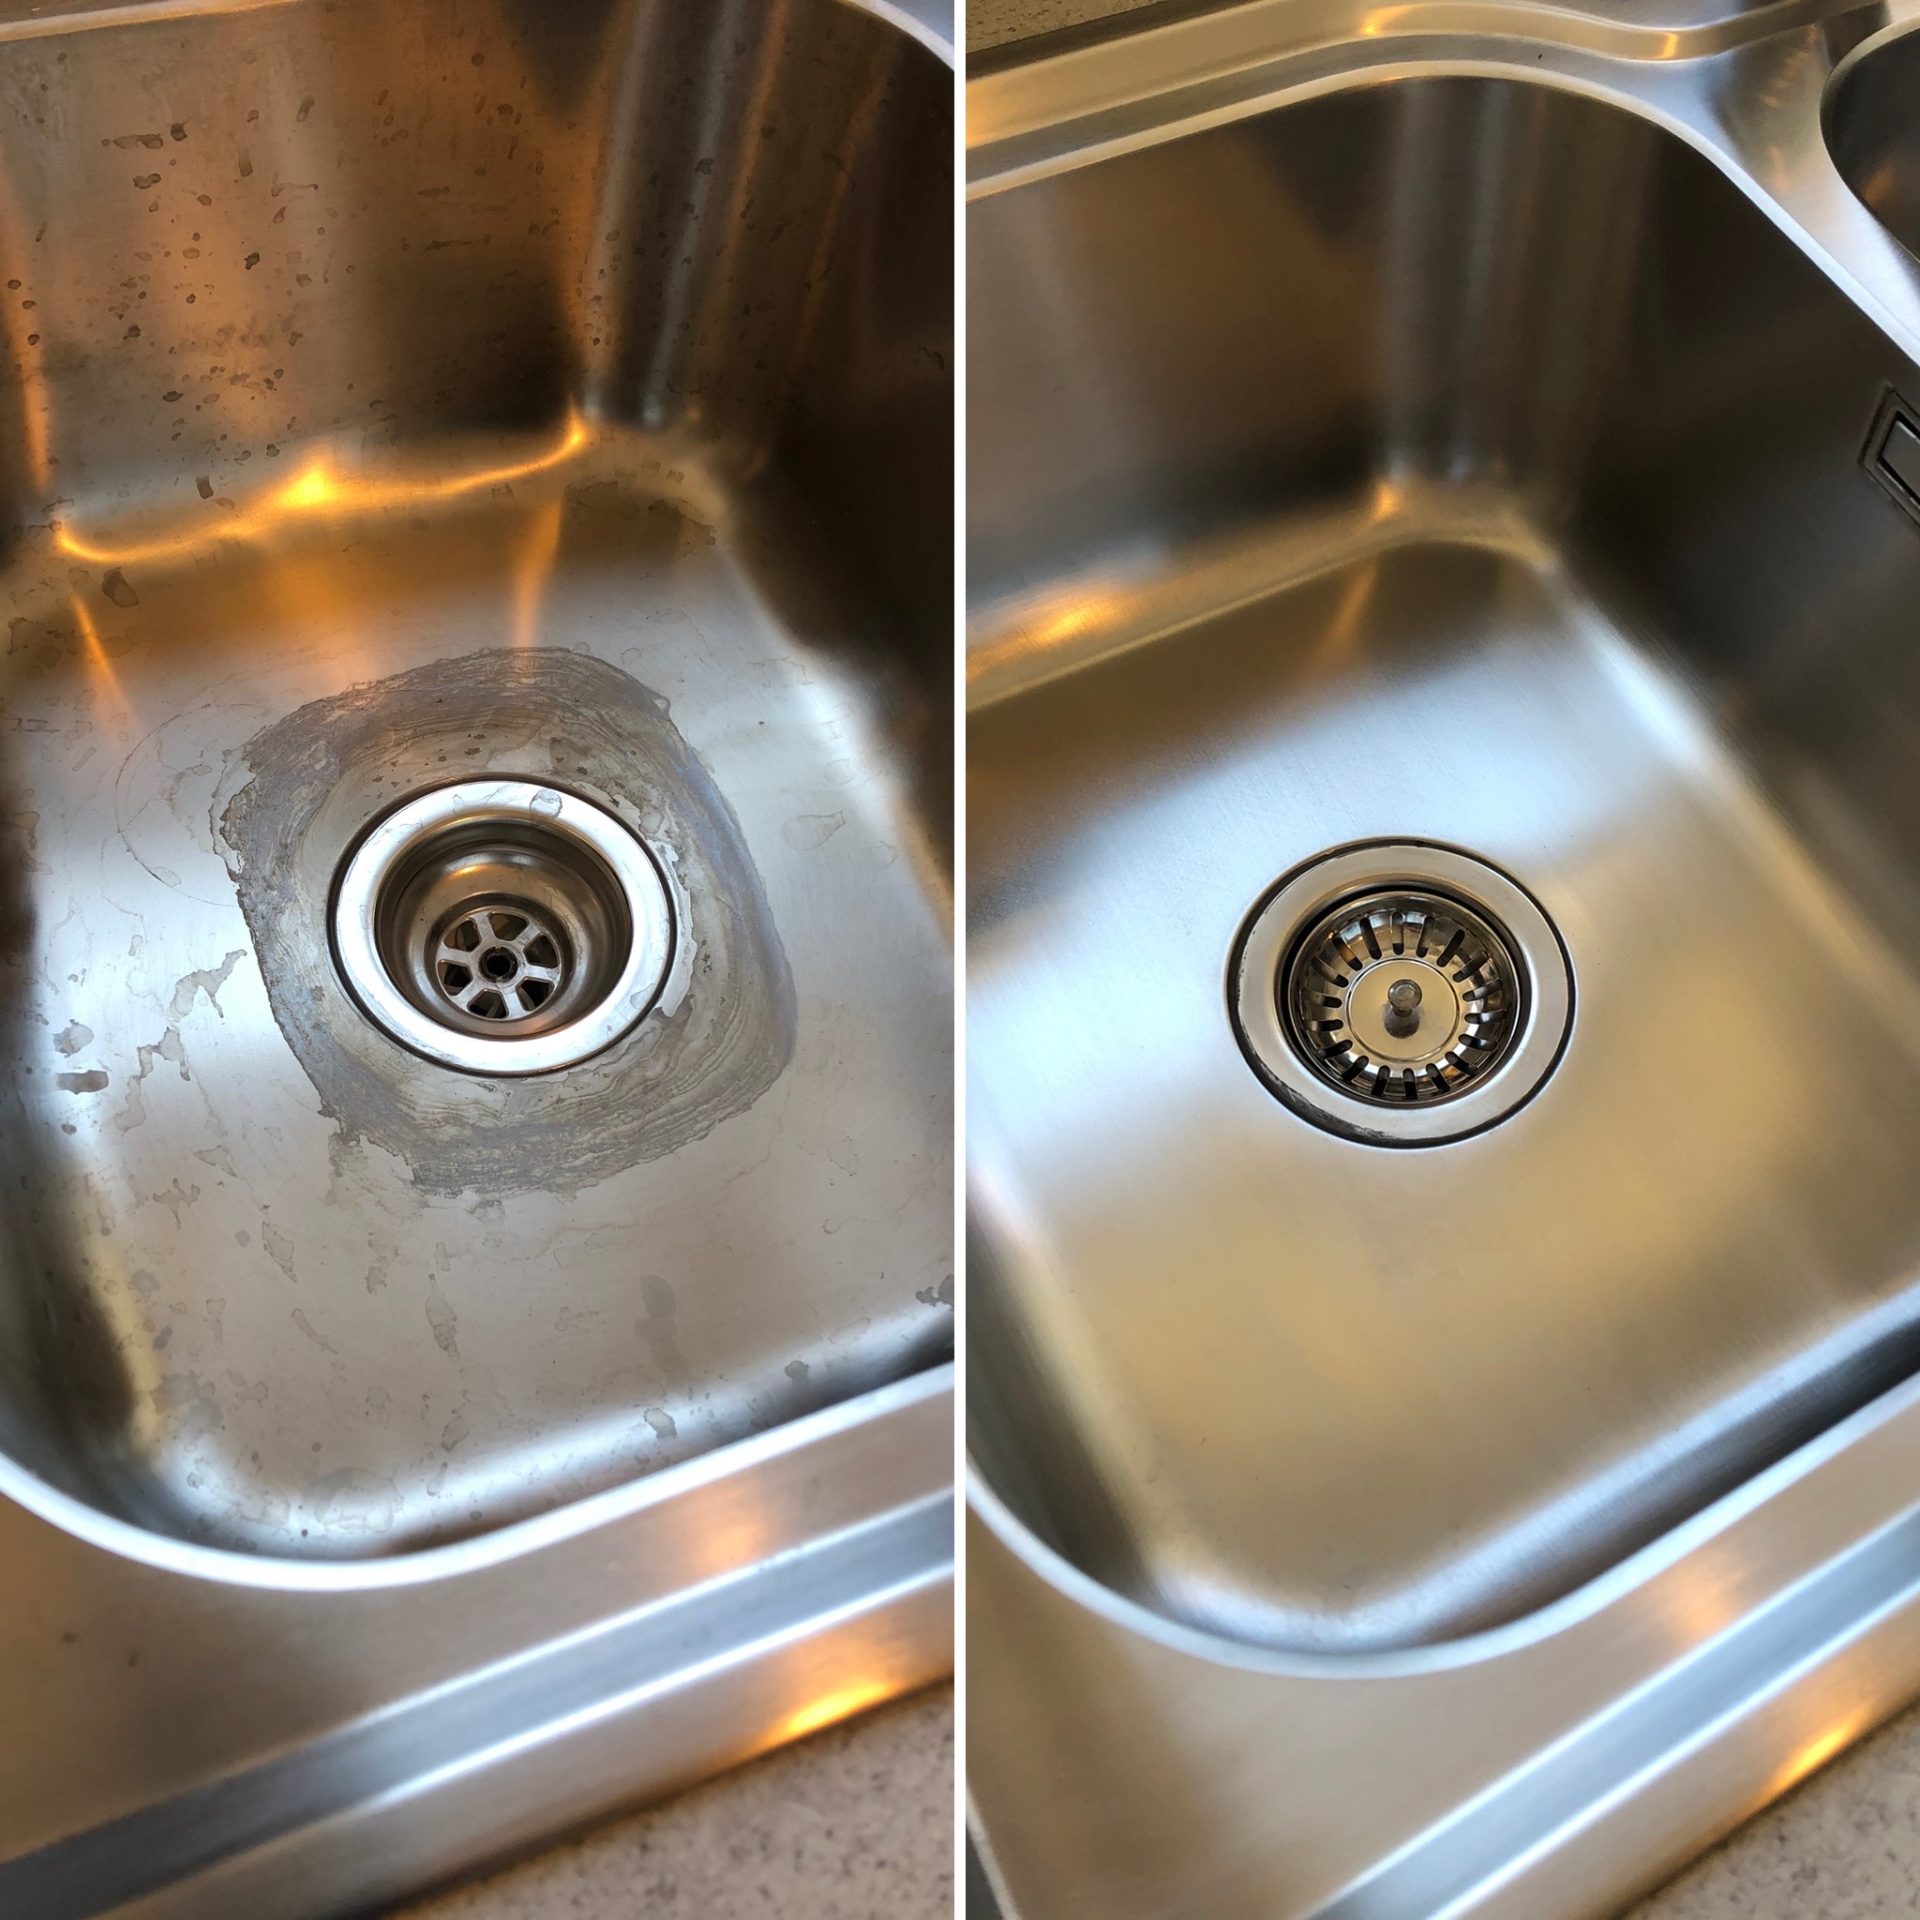 Damaged Stainless Steel Sink